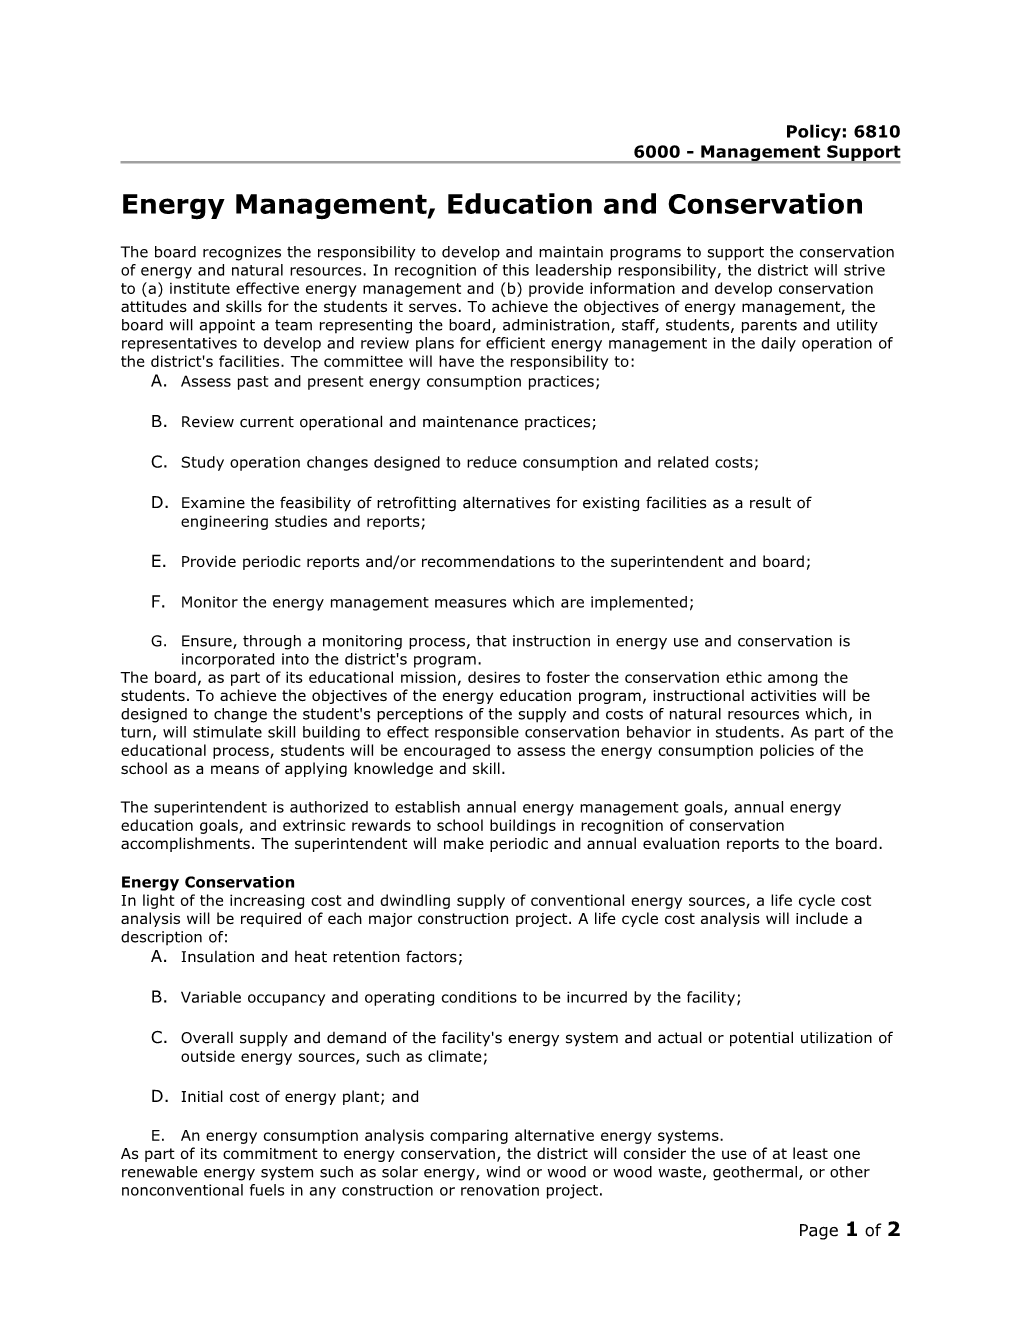 Energy Management, Education and Conservation